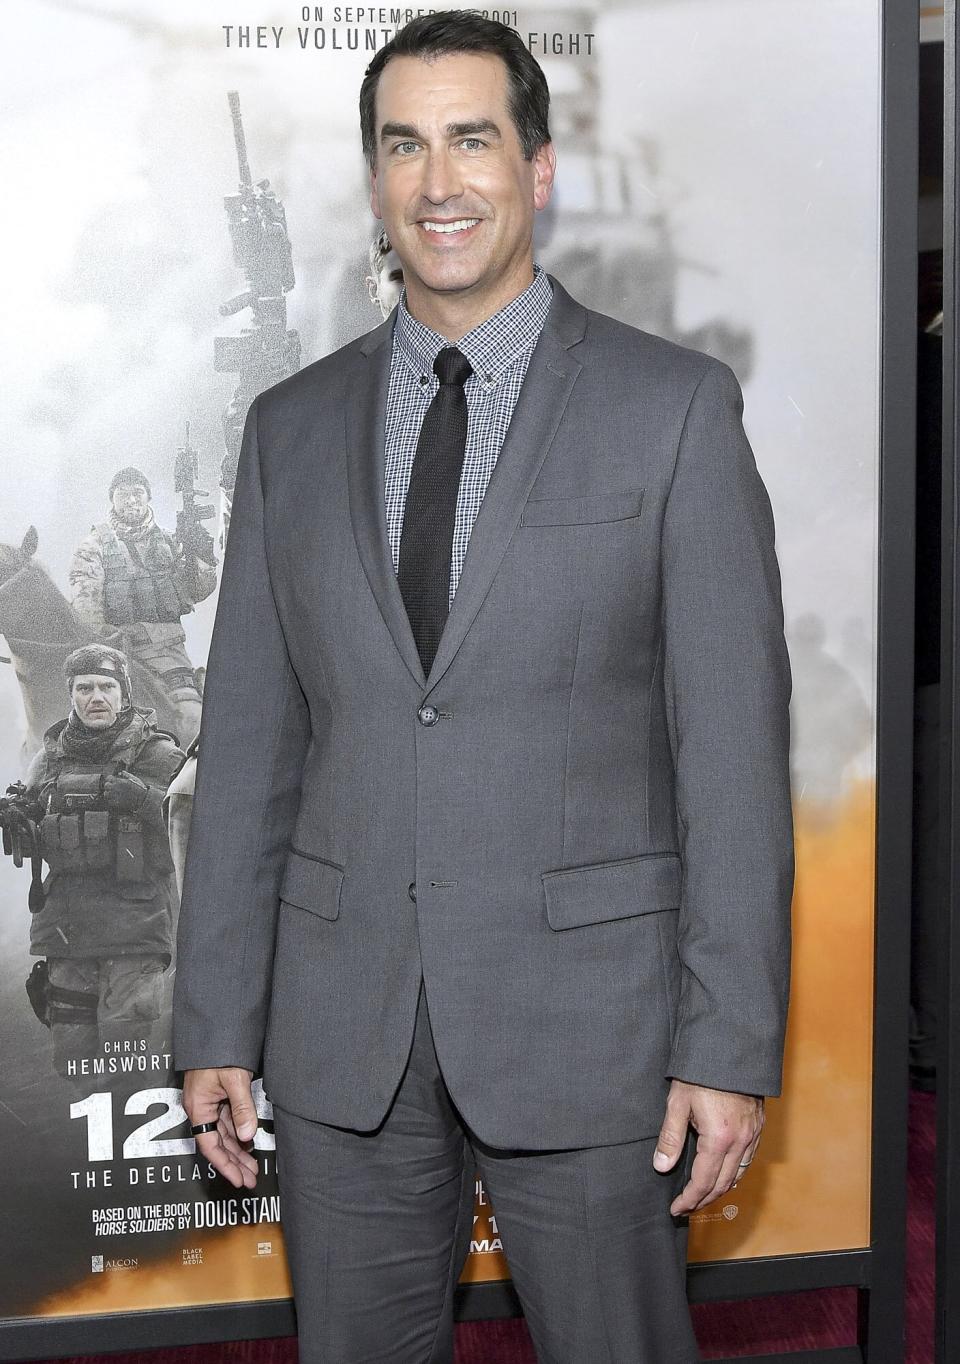 Rob Riggle attends the "12 Strong" World Premiere at Jazz at Lincoln Center on January 16, 2018 in New York City